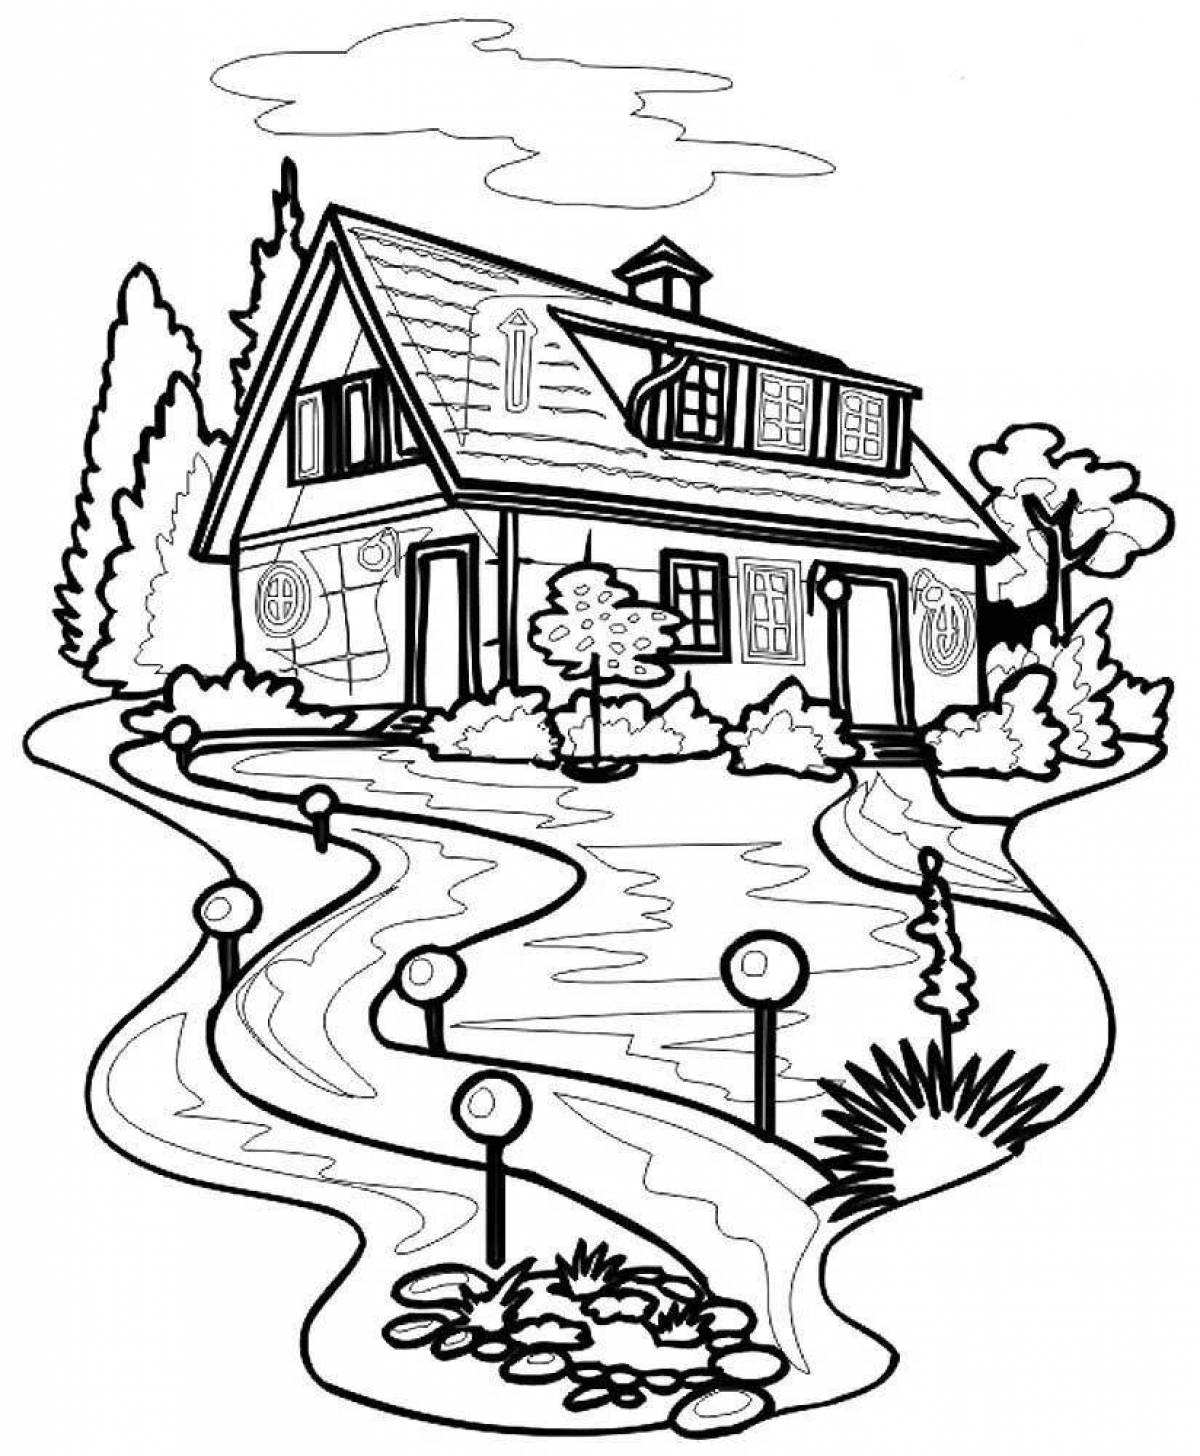 Coloring harmonious country house